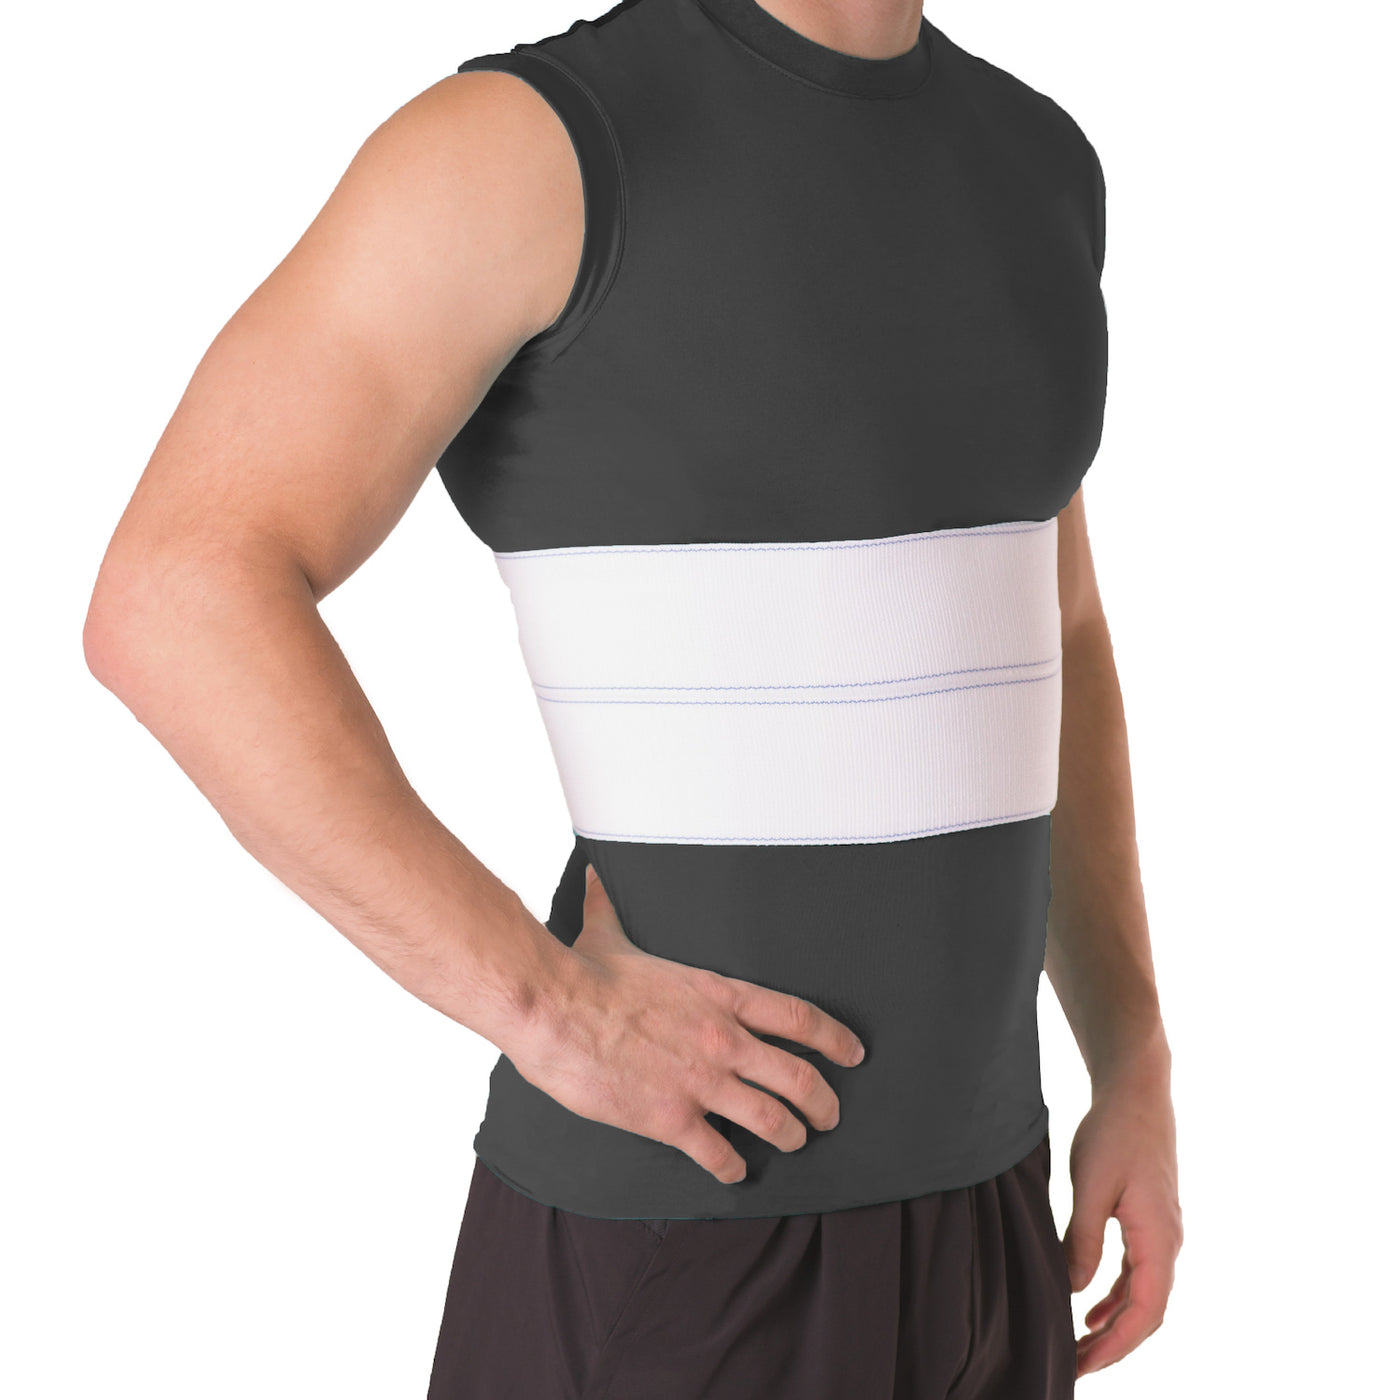 Rib Brace Broken Rib Belt Rib Chest Support Brace For Sore Or Bruised Ribs  Support Broken Sternum Dislocated Ribs Protection - M